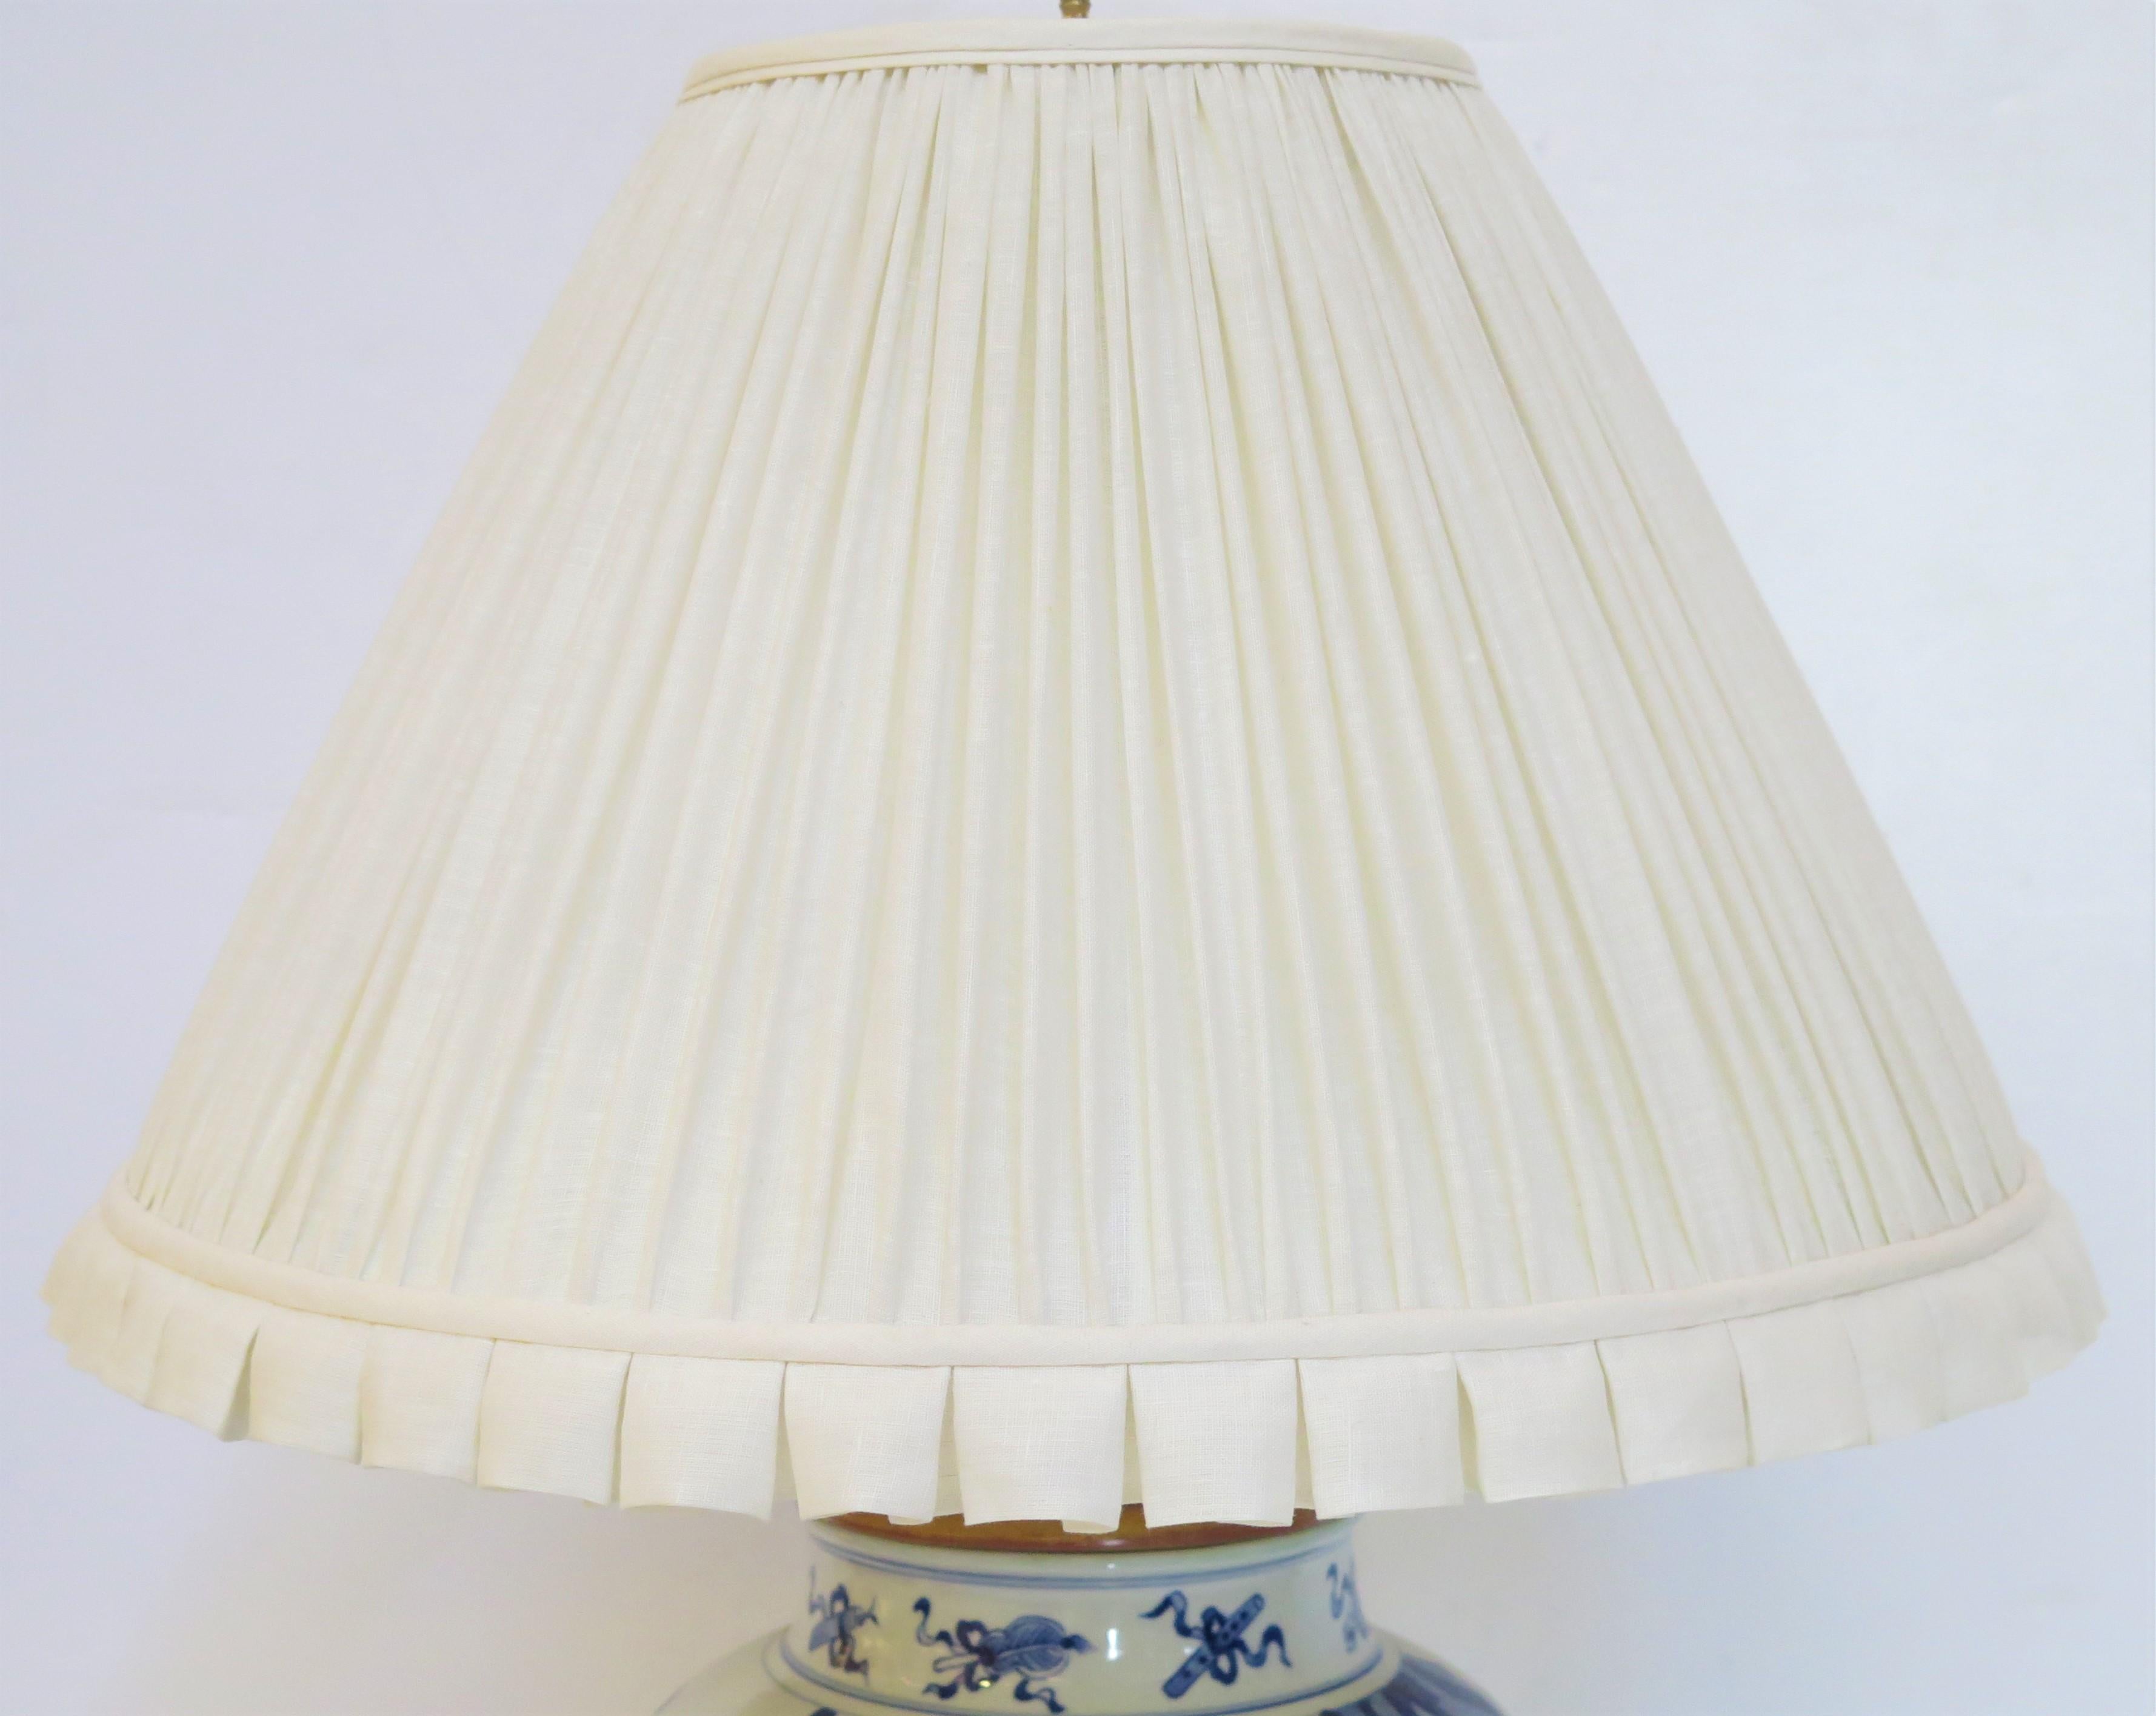 A Blue and White Chinese Porcelain Lamp In Good Condition For Sale In Dallas, TX